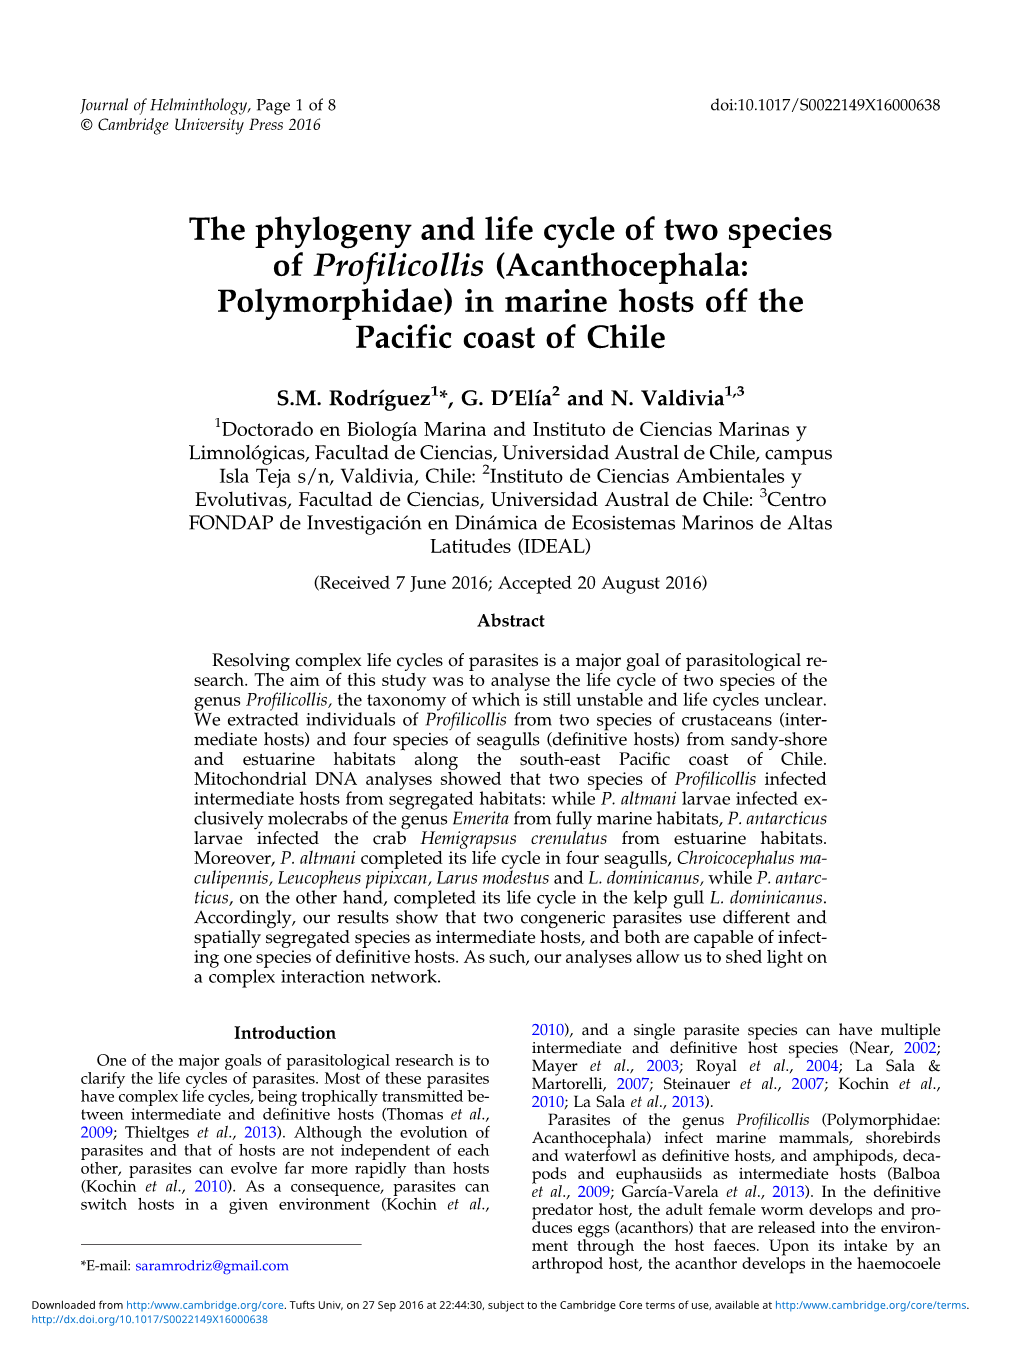 The Phylogeny and Life Cycle of Two Species of Profilicollis (Acanthocephala: Polymorphidae) in Marine Hosts Off the Pacific Coast of Chile